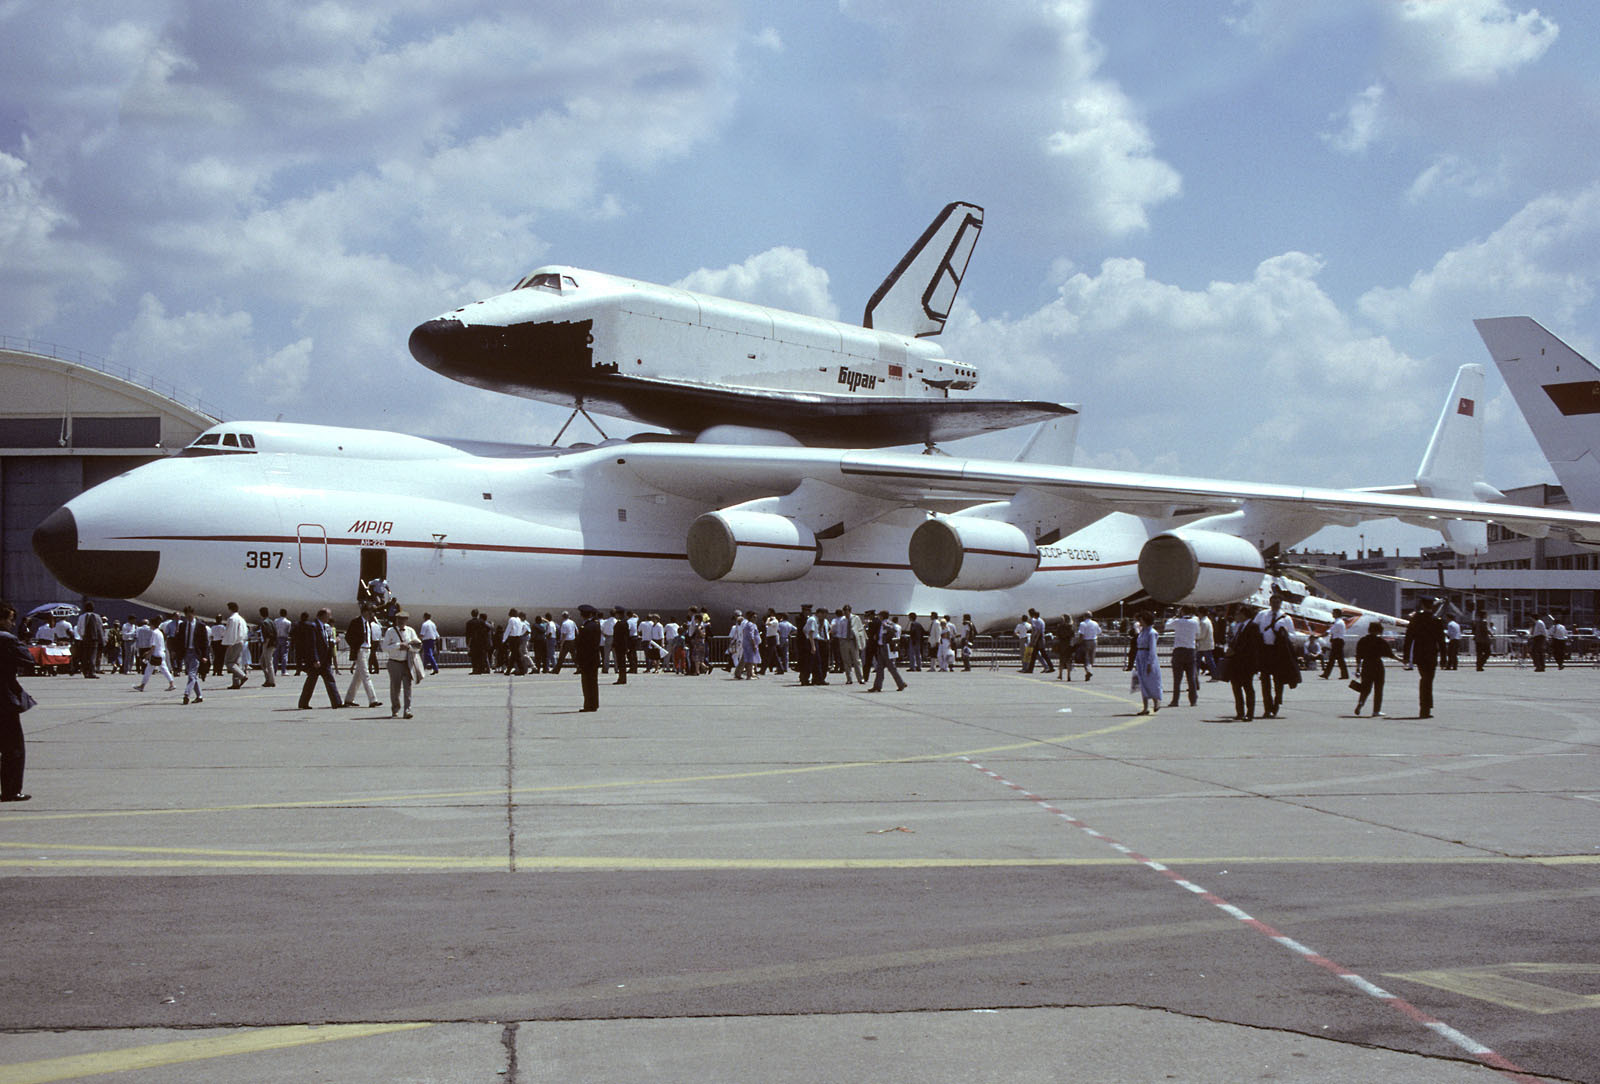 050-Exhibition%20au%20Bourget%20avec%20Bourane-Airshow%20with%20Buran%20at%20Le%20Bourget-1134884.jpg